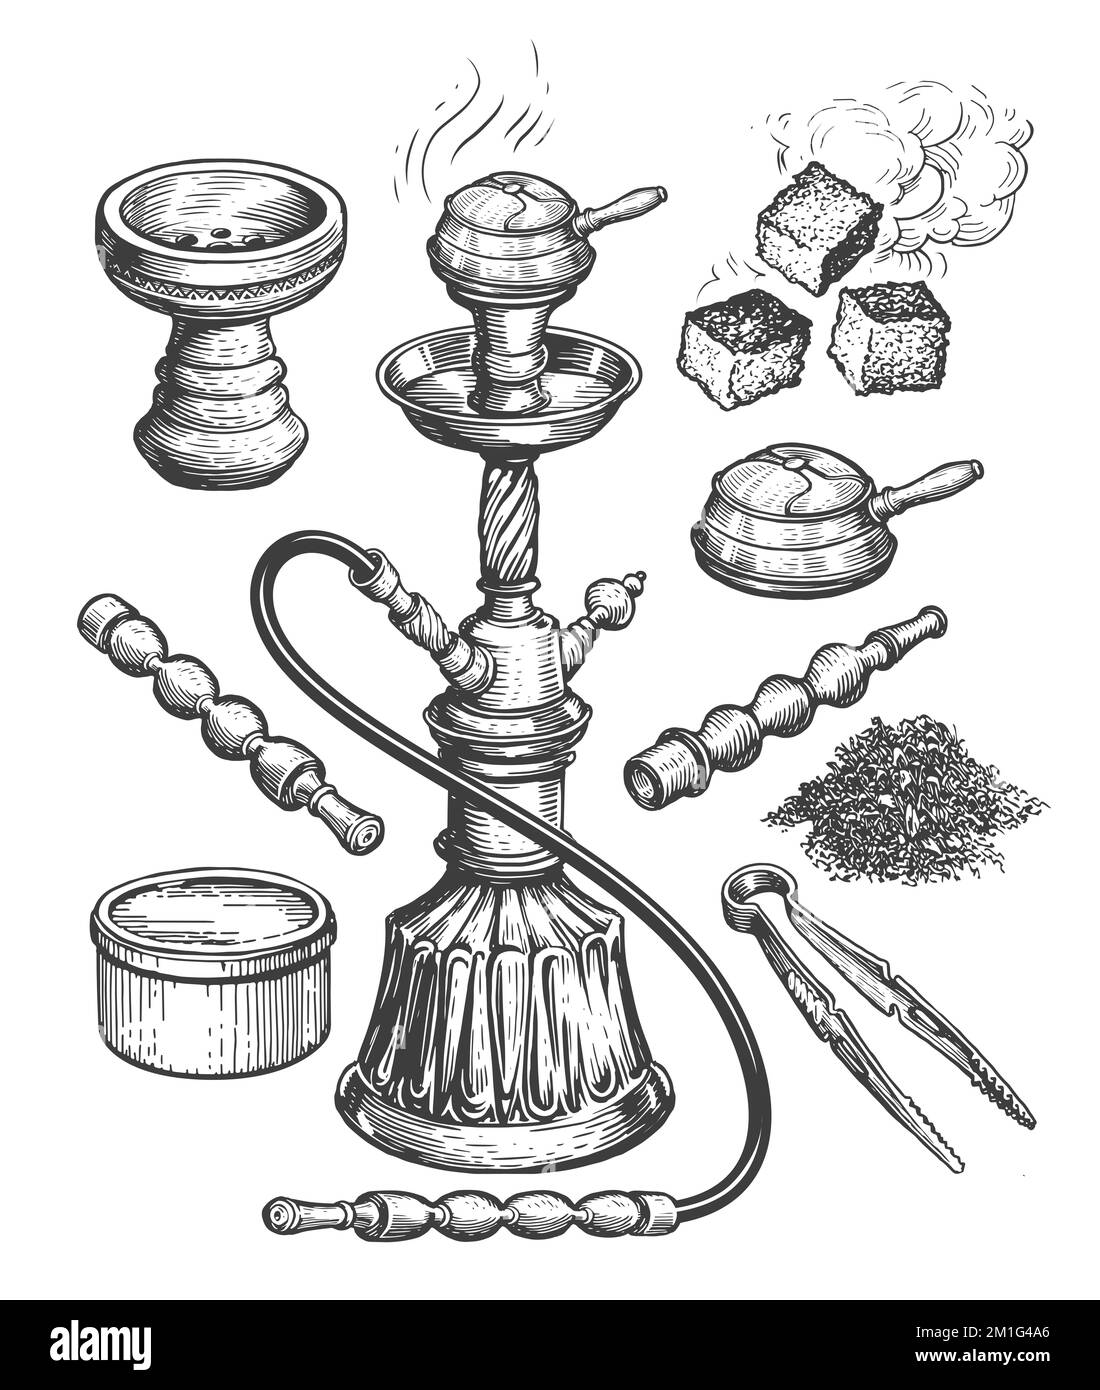 Smoking hookah and accessories collection sketch. Shisha, tobacco, tongs, charcoal. Hand drawn vintage illustration Stock Photo